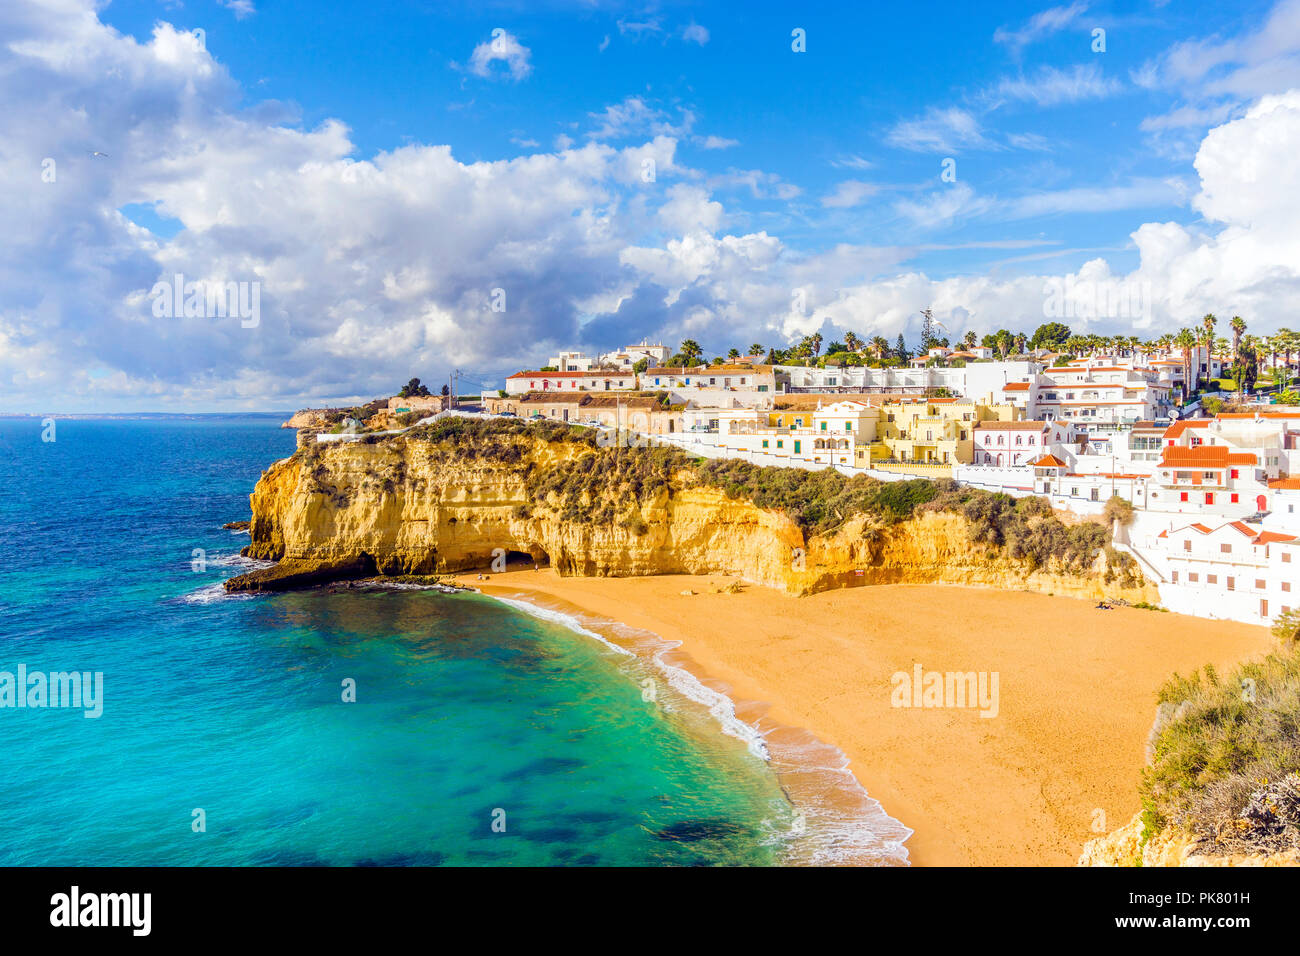 Wide sandy beach and white architecture of charming Carvoeiro, Algarve, Portugal Stock Photo